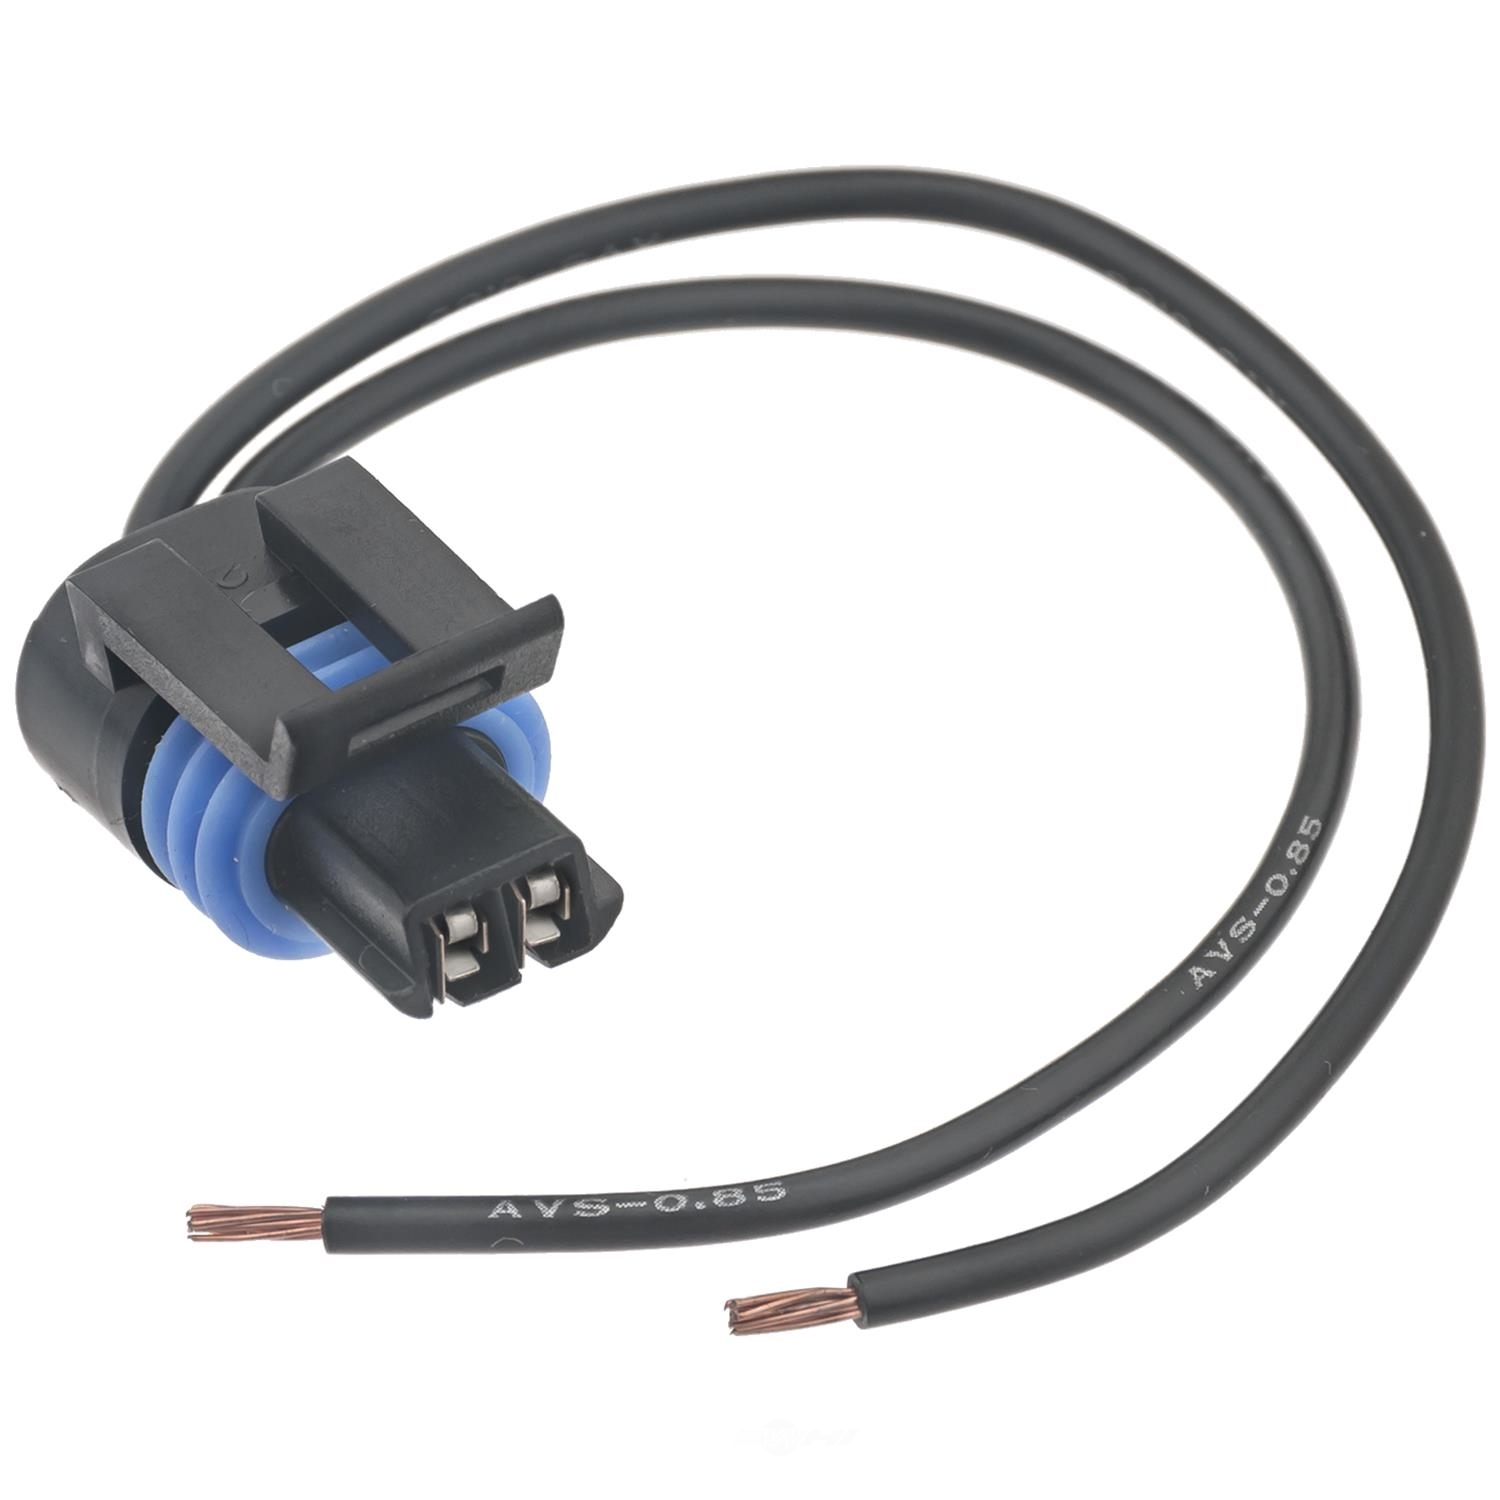 HANDY PACK - Manual Transmission Fluid Temperature Sensor Connector - HDY HP3840